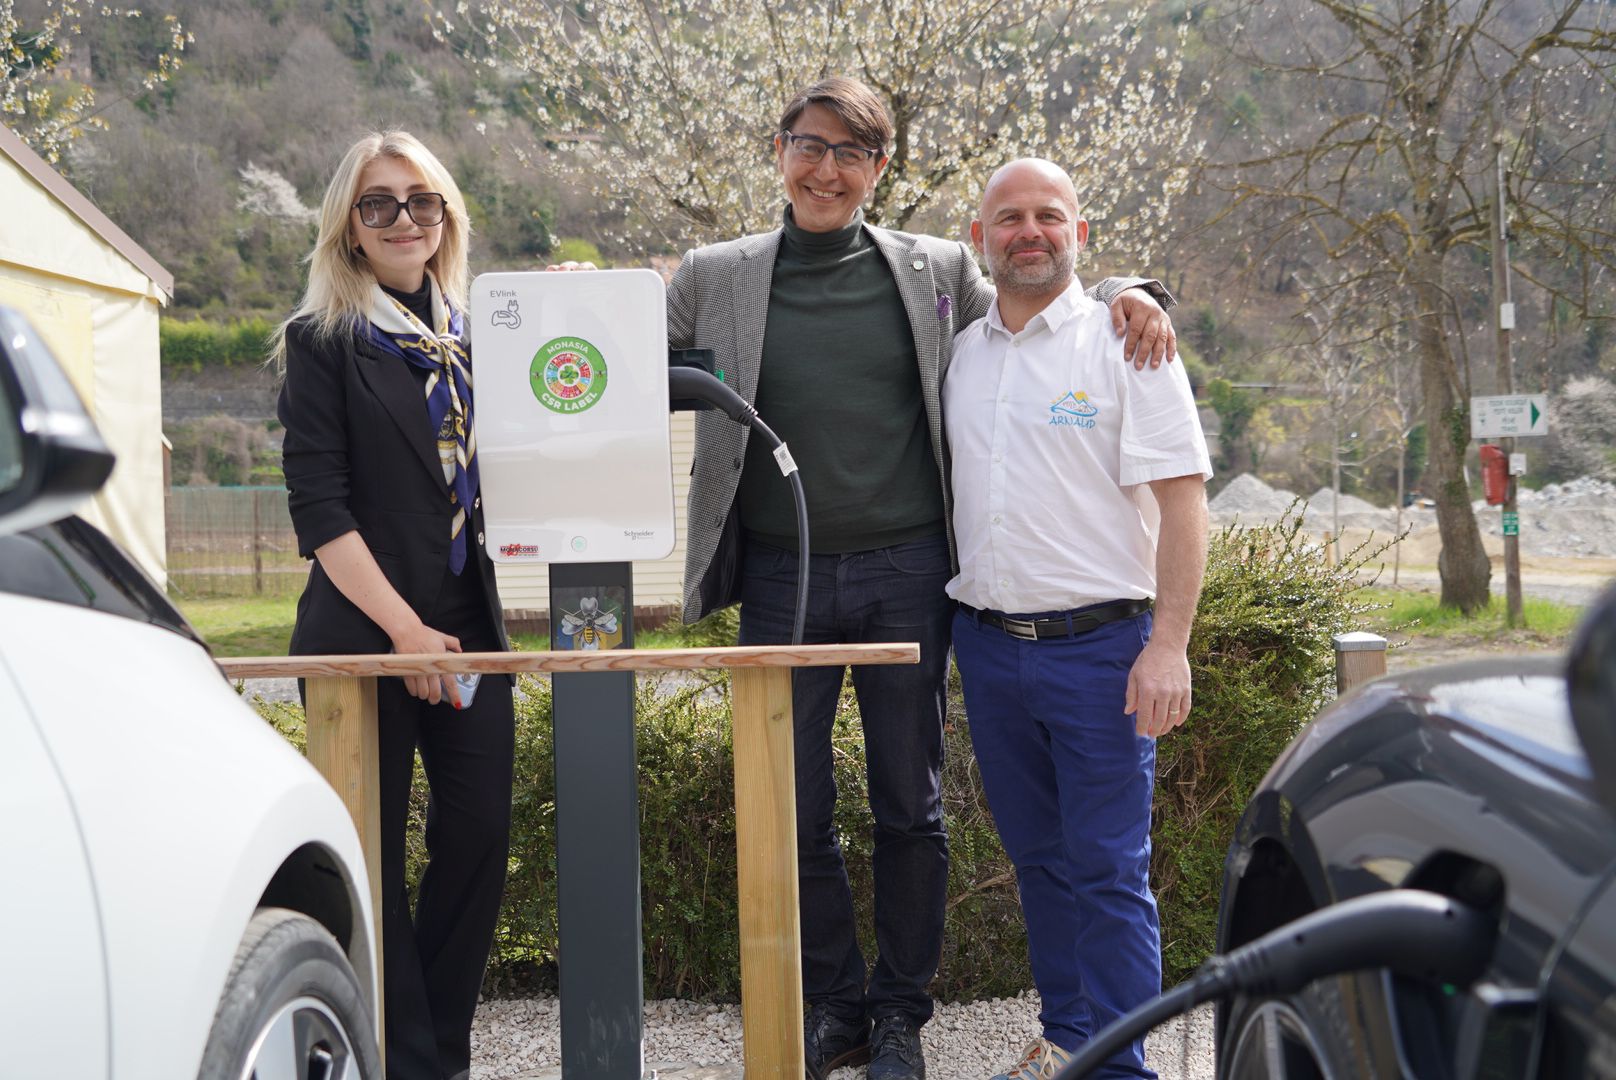 Power to the plug-ins celebrated at the Camping Les Templiers made possible by Lepton Charity Foundation with a media support of MonAsia Association image